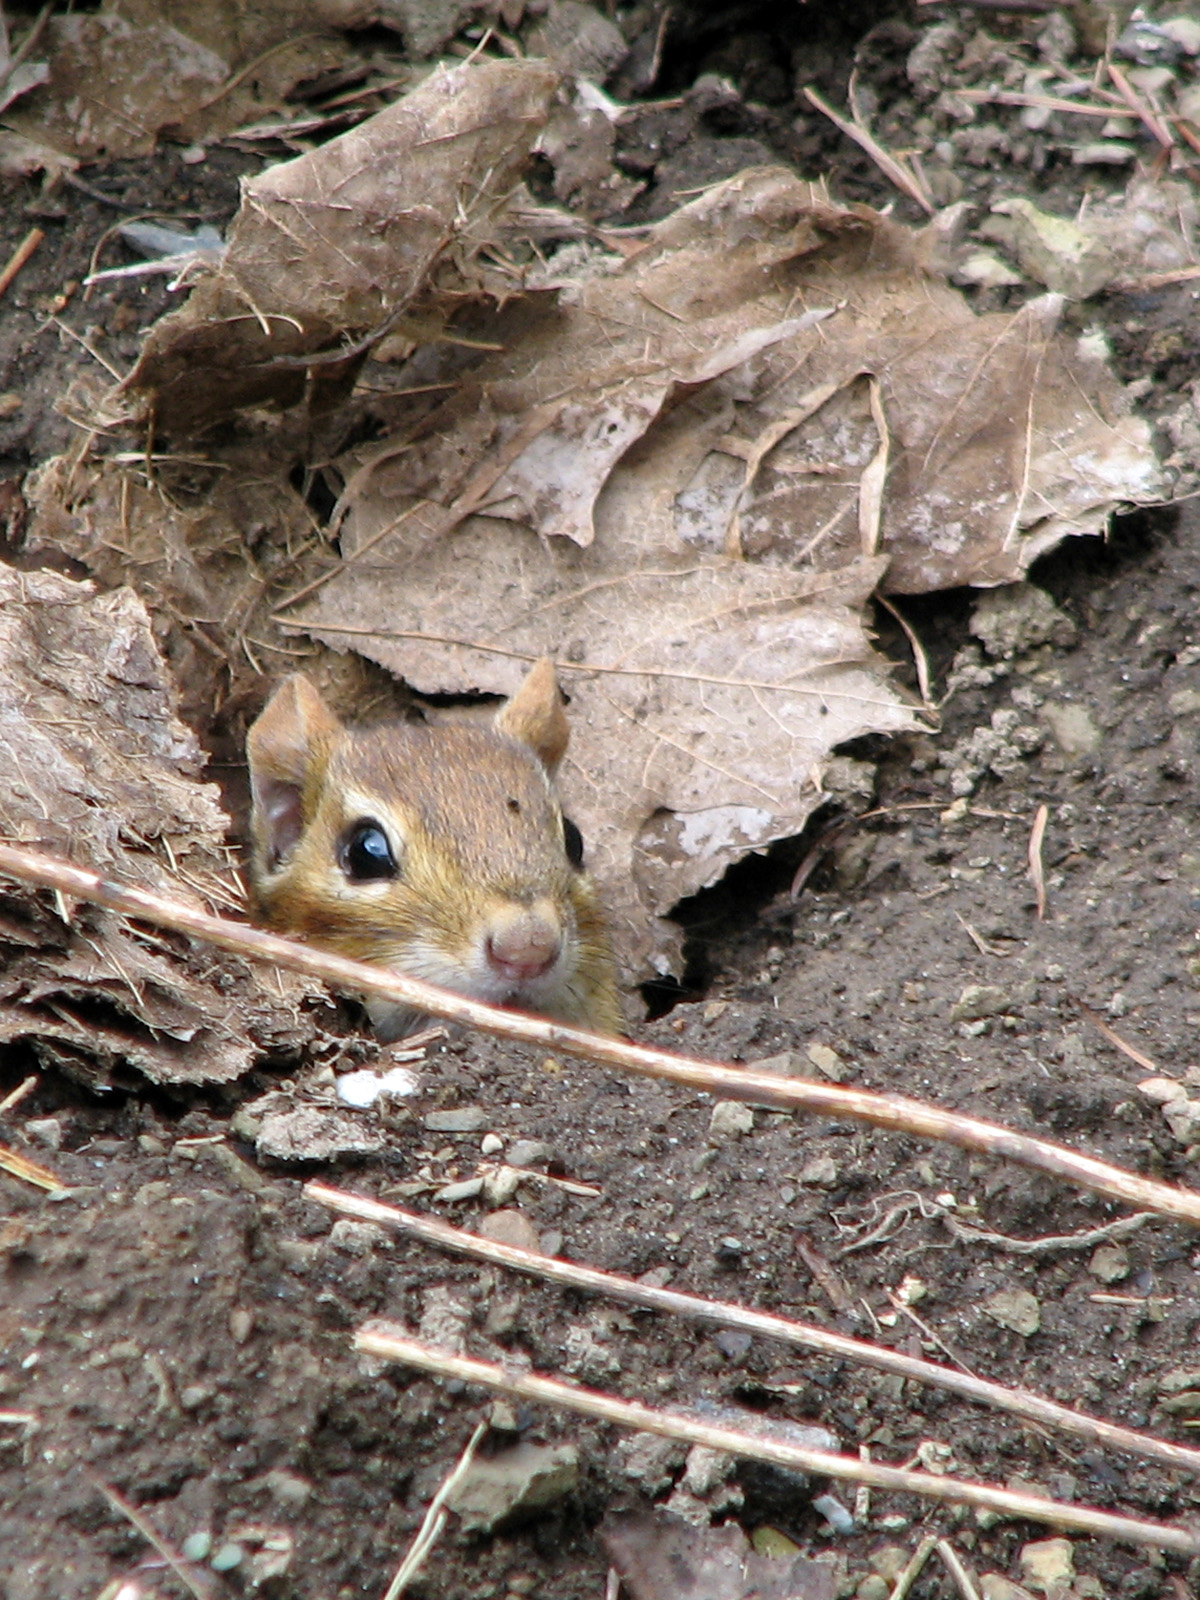 Chipmunk emerging from its hole